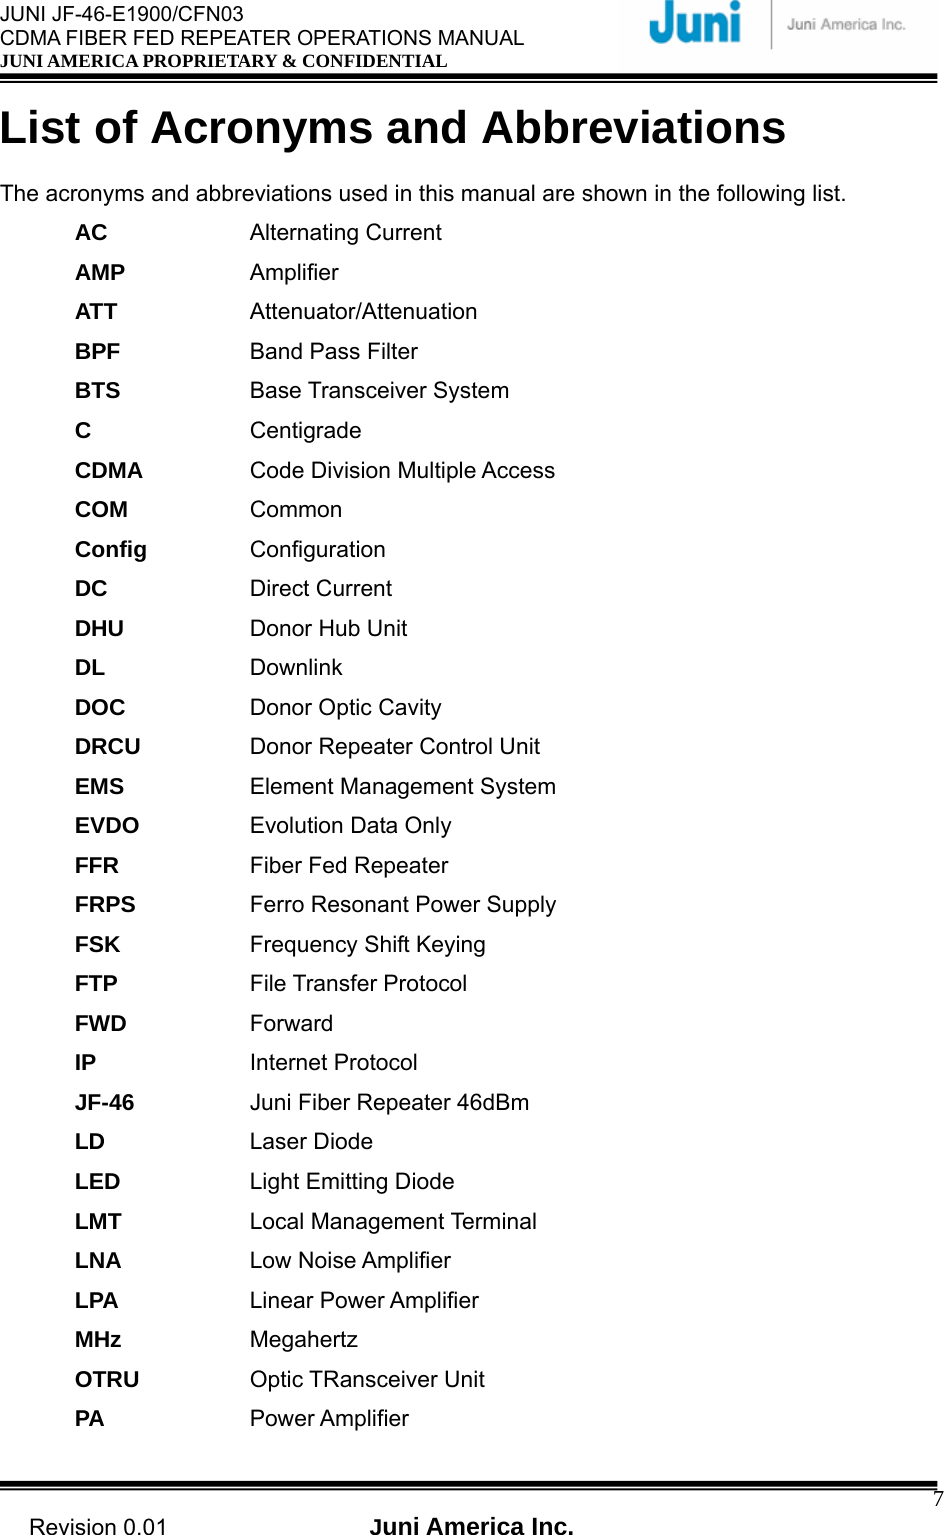  JUNI JF-46-E1900/CFN03 CDMA FIBER FED REPEATER OPERATIONS MANUAL JUNI AMERICA PROPRIETARY &amp; CONFIDENTIAL                                   Revision 0.01  Juni America Inc.  7List of Acronyms and Abbreviations  The acronyms and abbreviations used in this manual are shown in the following list. AC   Alternating Current AMP   Amplifier ATT   Attenuator/Attenuation BPF   Band Pass Filter BTS   Base Transceiver System C   Centigrade CDMA   Code Division Multiple Access COM   Common Config   Configuration DC   Direct Current DHU   Donor Hub Unit DL   Downlink DOC   Donor Optic Cavity DRCU   Donor Repeater Control Unit EMS   Element Management System EVDO   Evolution Data Only FFR   Fiber Fed Repeater FRPS   Ferro Resonant Power Supply FSK   Frequency Shift Keying FTP   File Transfer Protocol FWD   Forward IP   Internet Protocol JF-46   Juni Fiber Repeater 46dBm LD   Laser Diode LED   Light Emitting Diode LMT   Local Management Terminal LNA   Low Noise Amplifier LPA   Linear Power Amplifier MHz   Megahertz OTRU   Optic TRansceiver Unit PA   Power Amplifier 